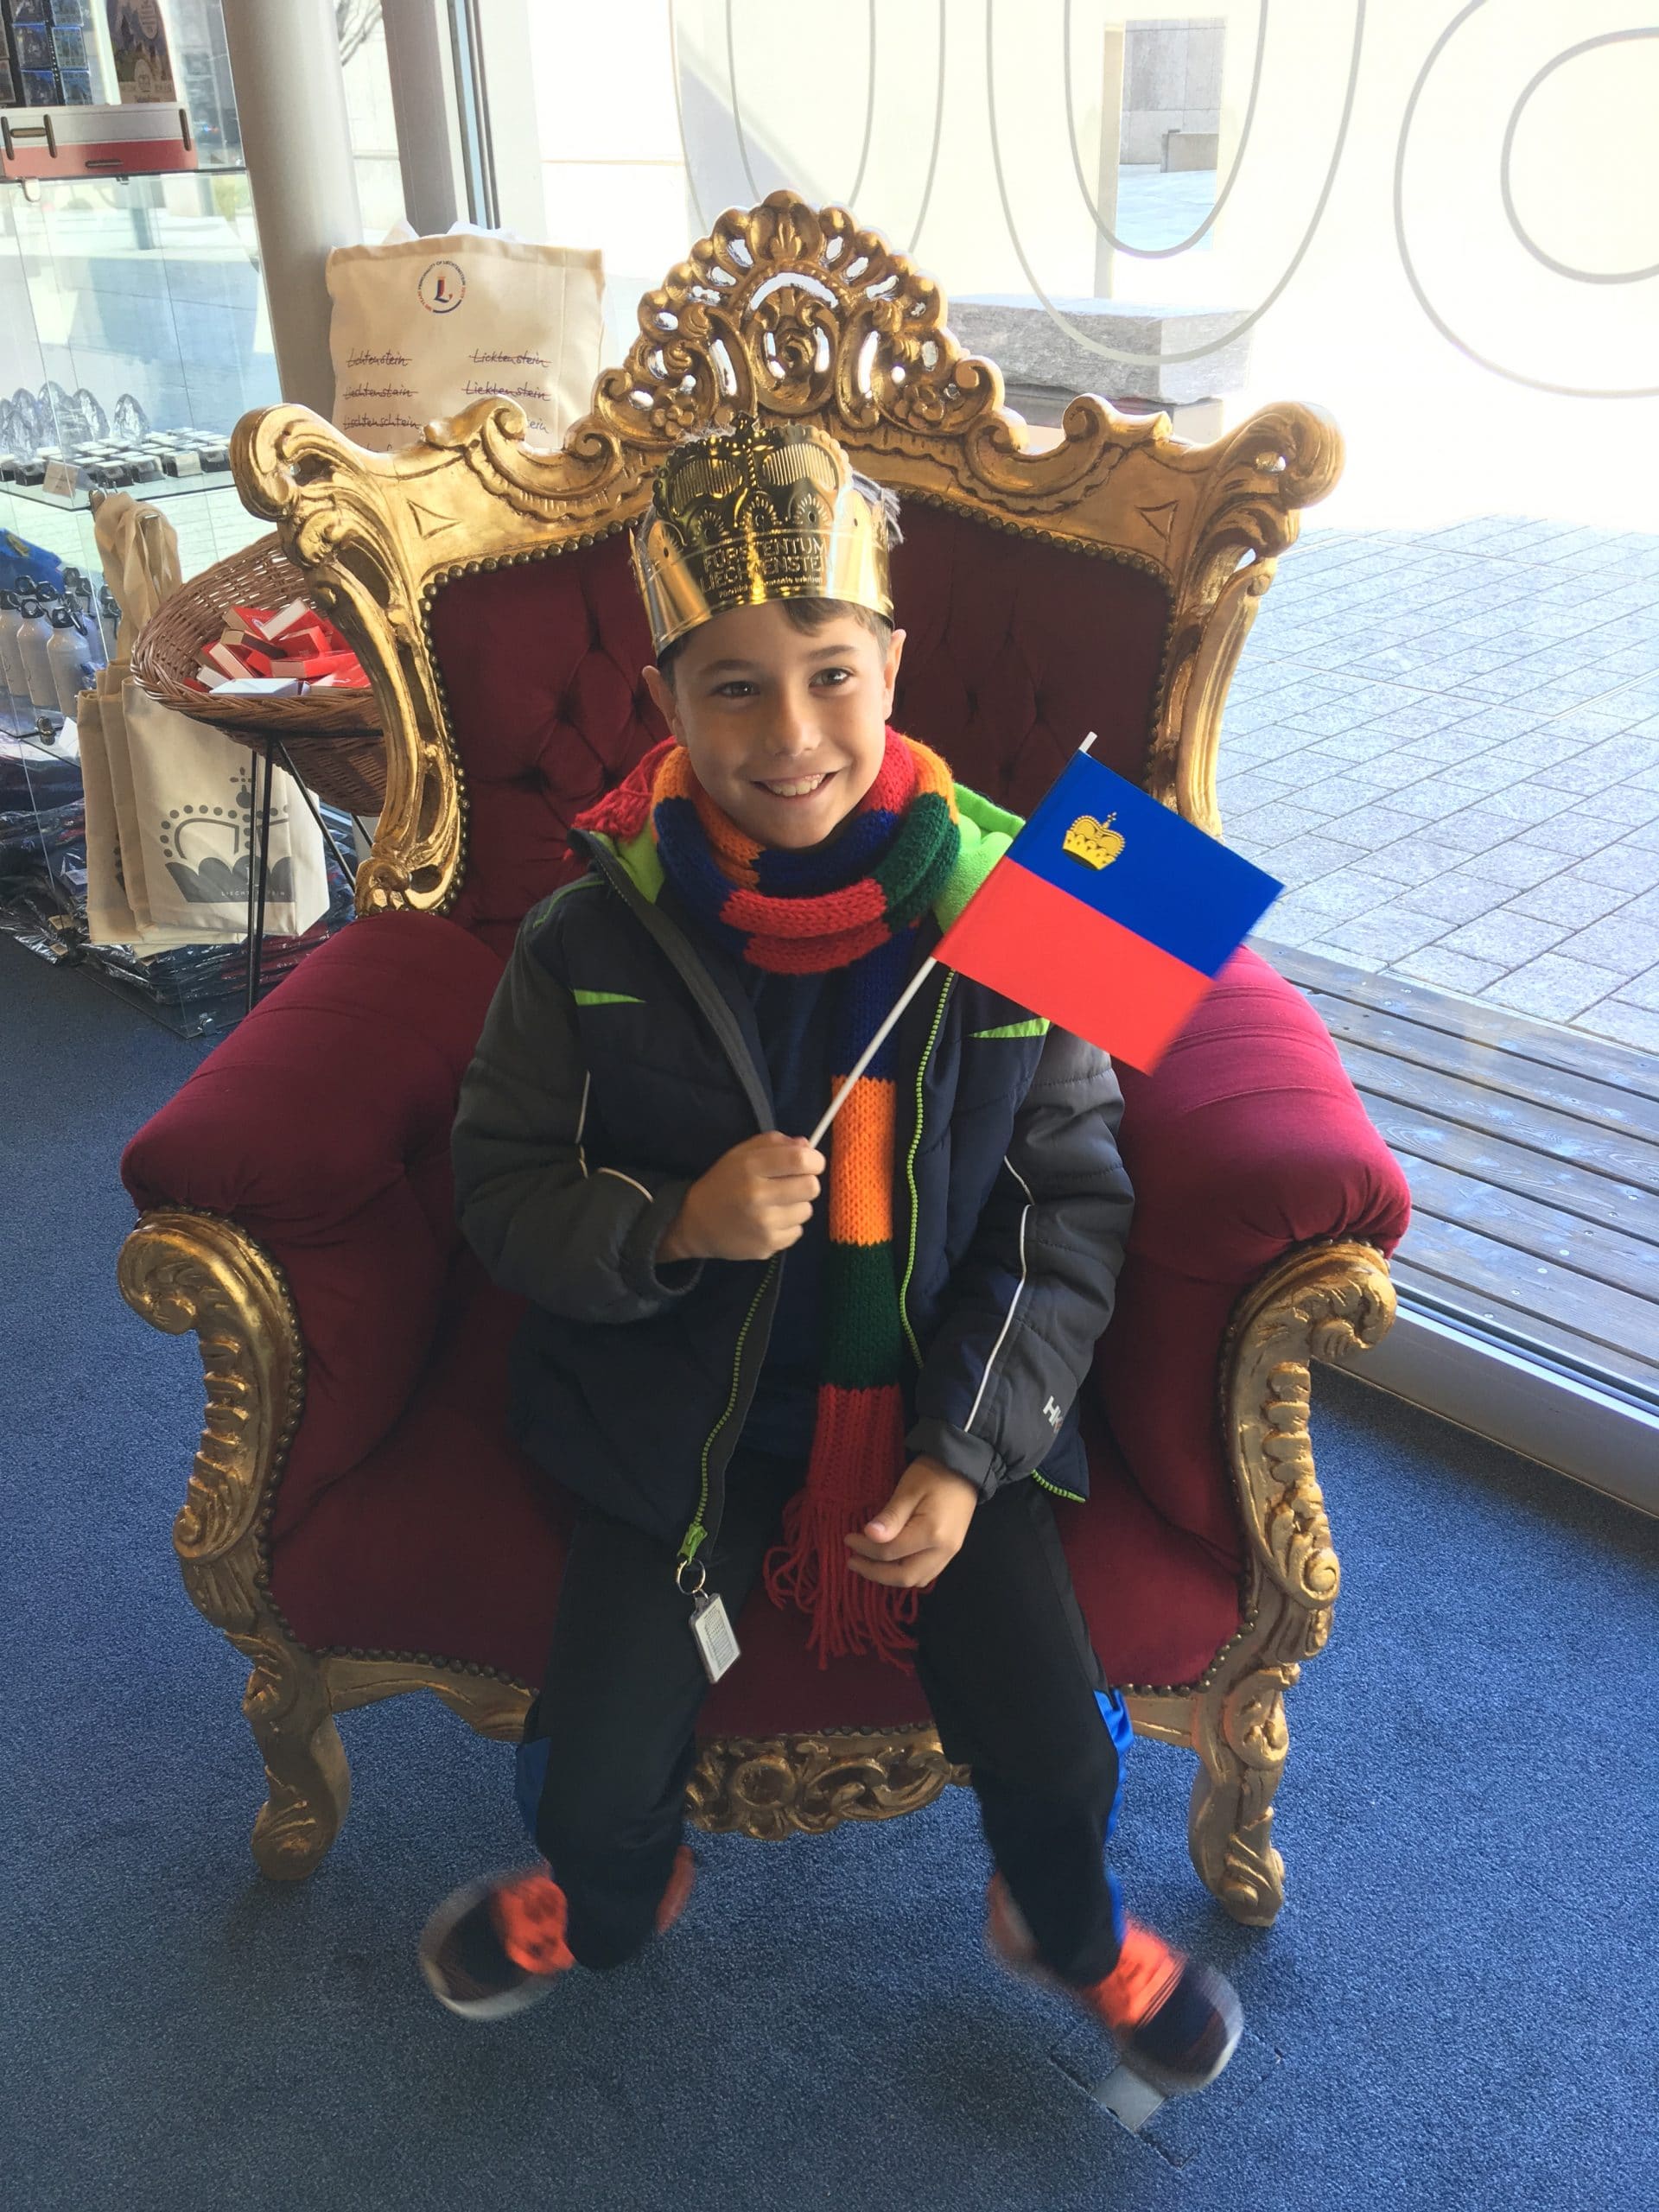 Visit the Liechtenstein Center and have the chance to be the Prince!